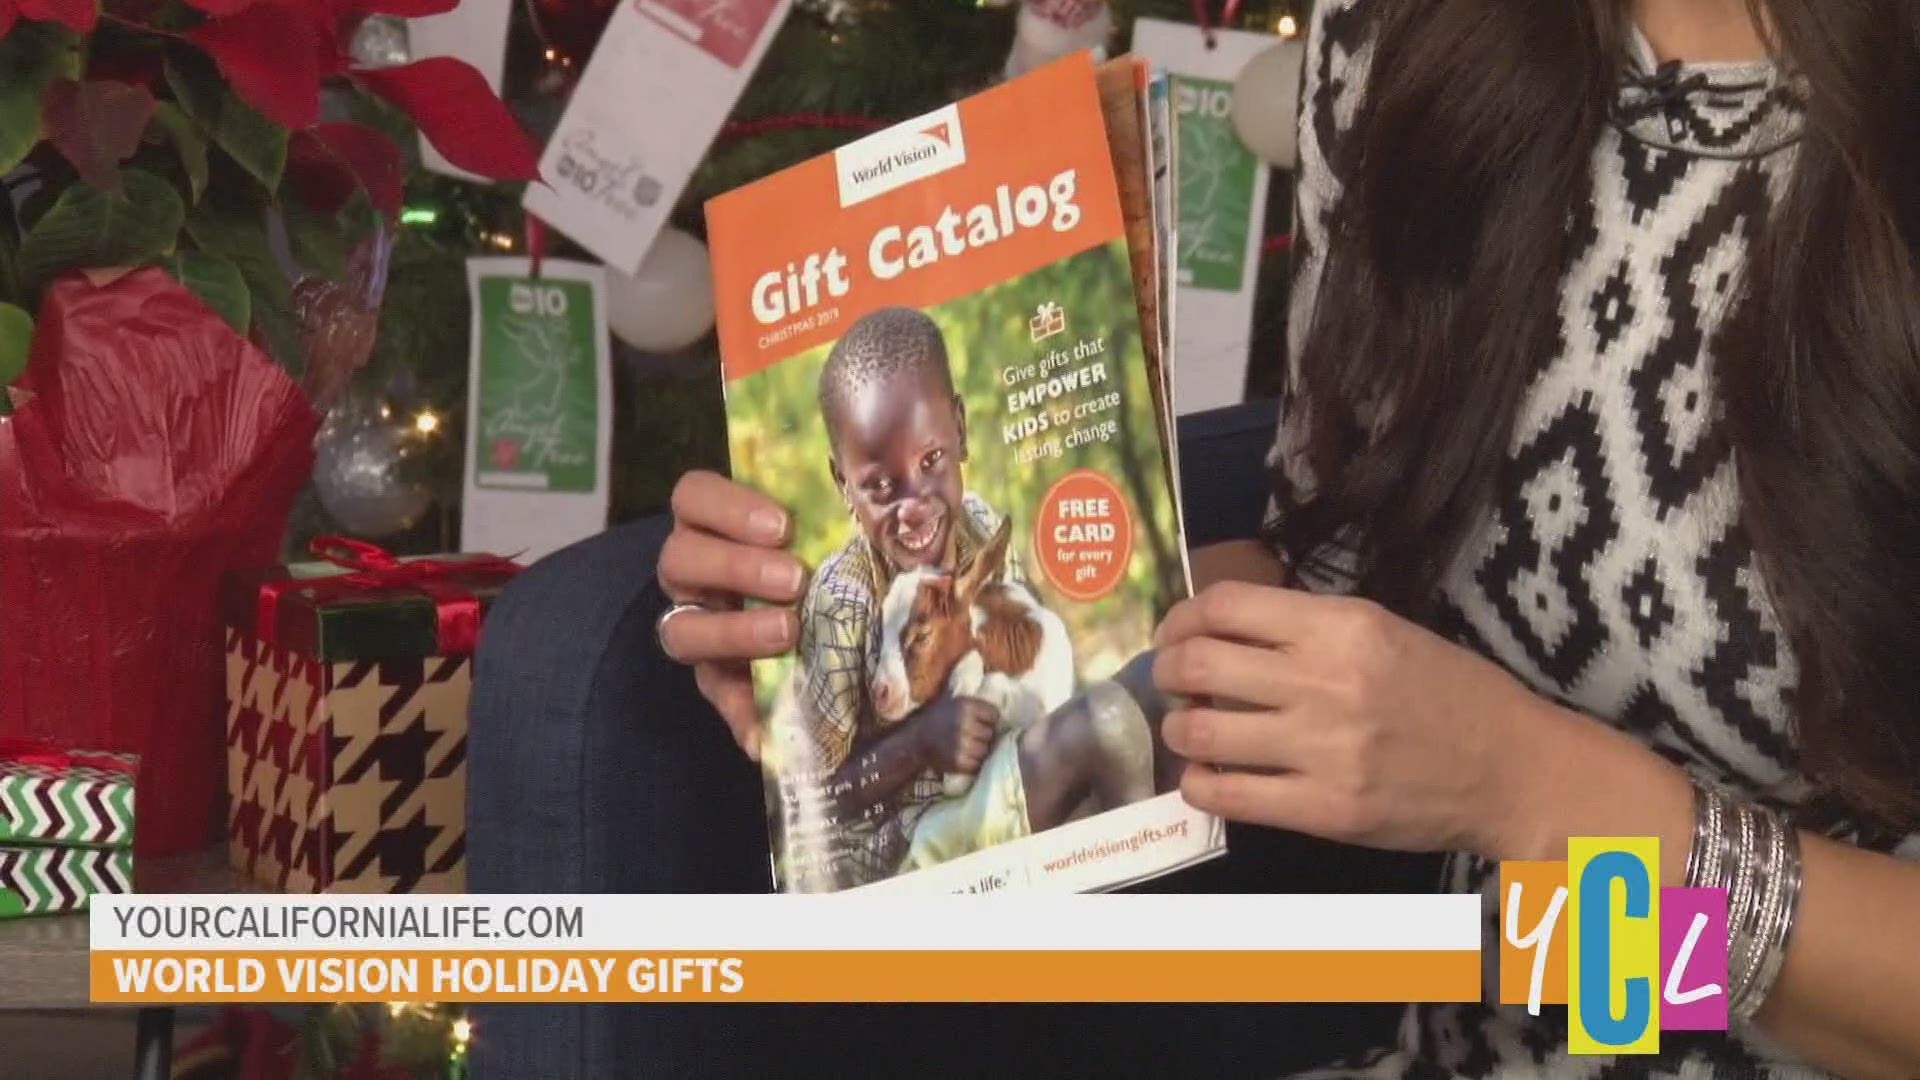 Gifts like goats, education, and child sponsorship that empower kids to create lasting change through World Vision’s Gift Catalog at www.worldvision.org